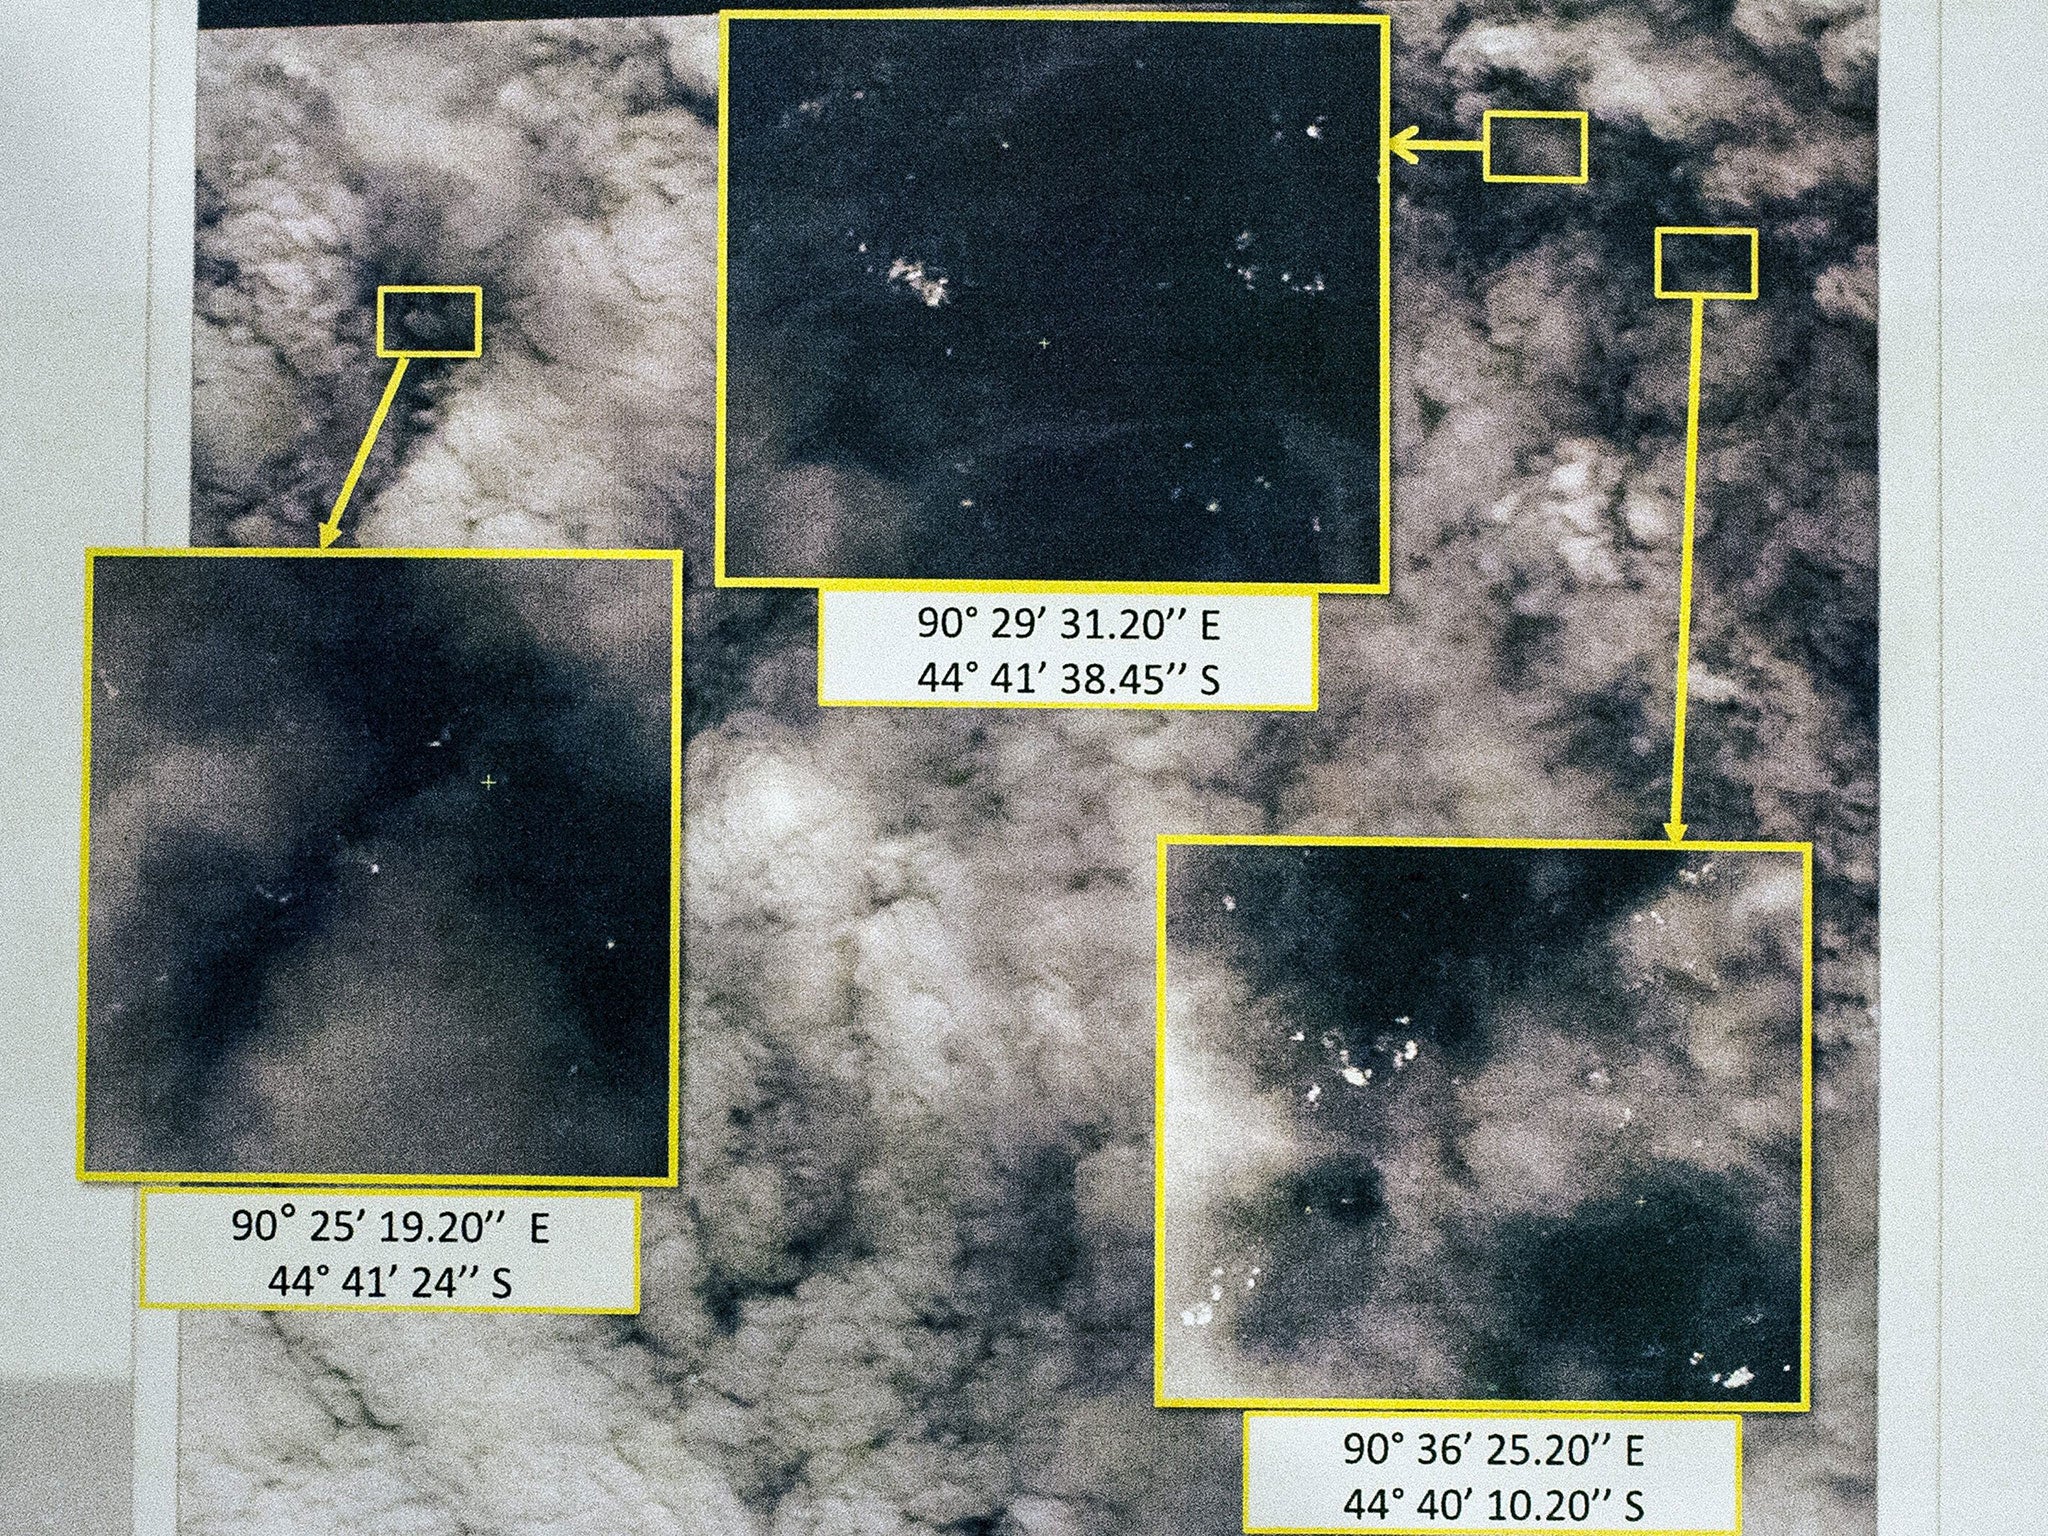 Satellite images showing locations of potential objects related to the search of Malaysia Airlines flight MH370 